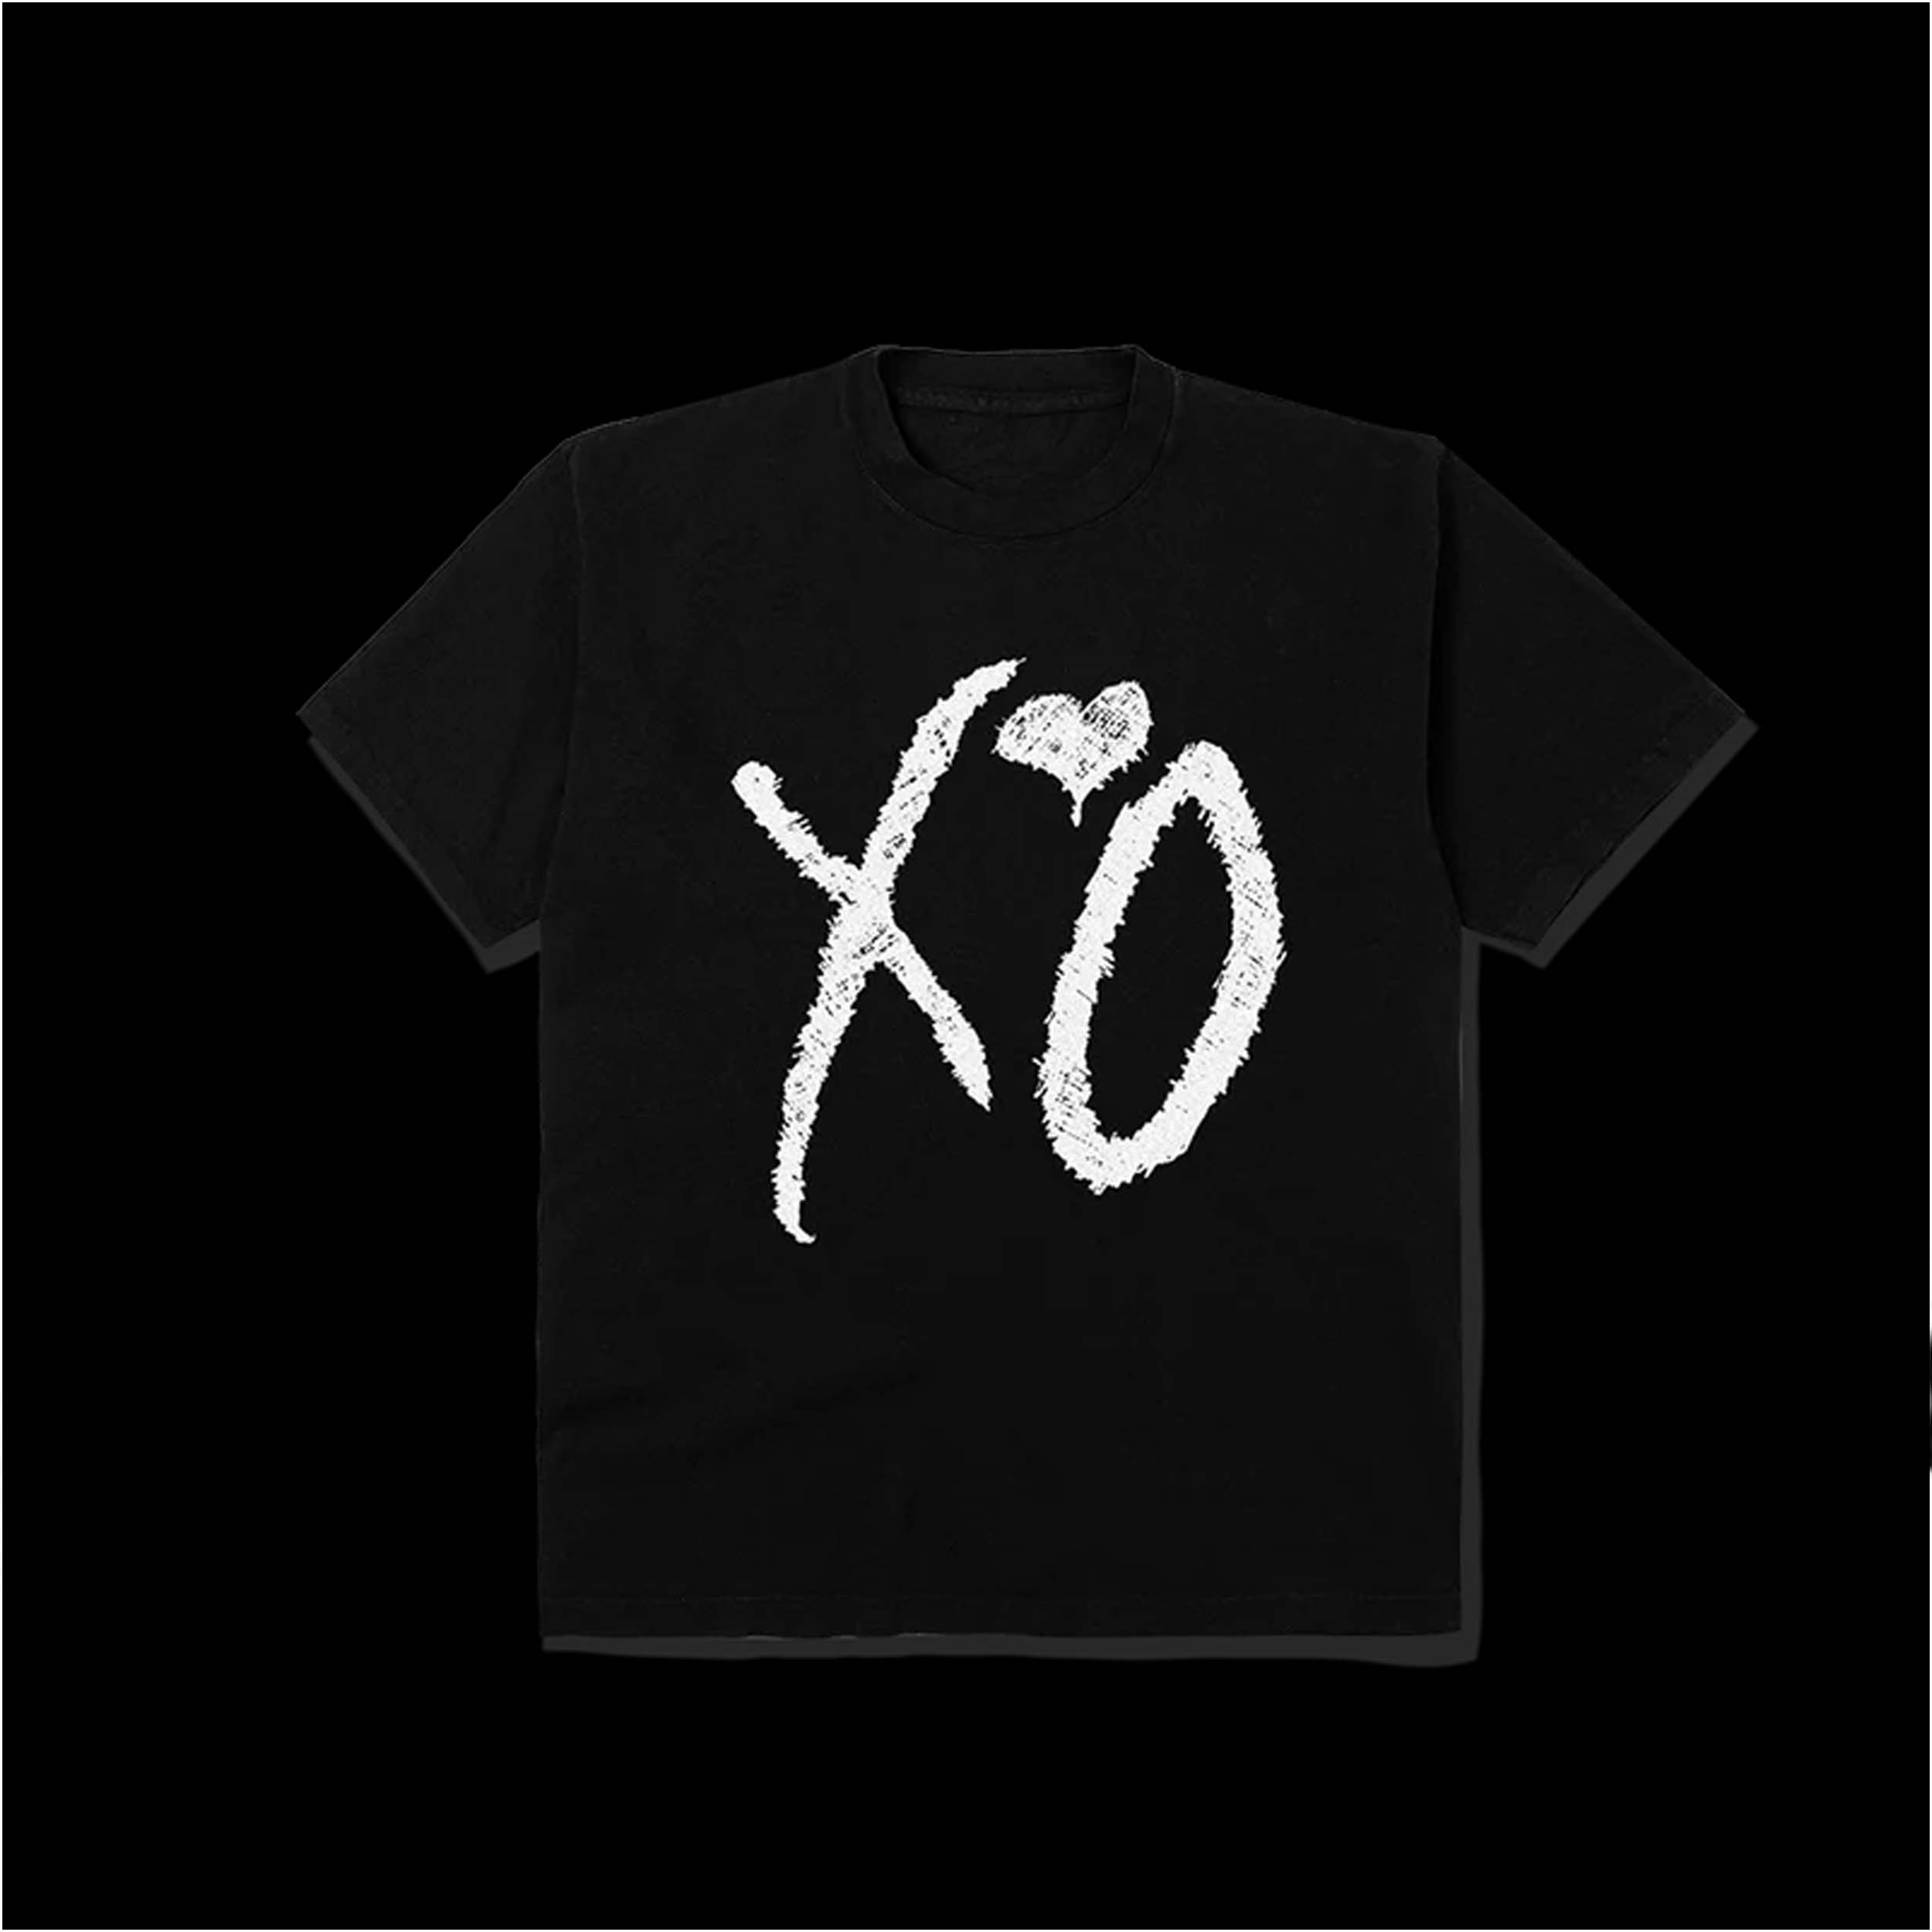 The Weeknd XO After Hours Til Dawn Tour Hoodie